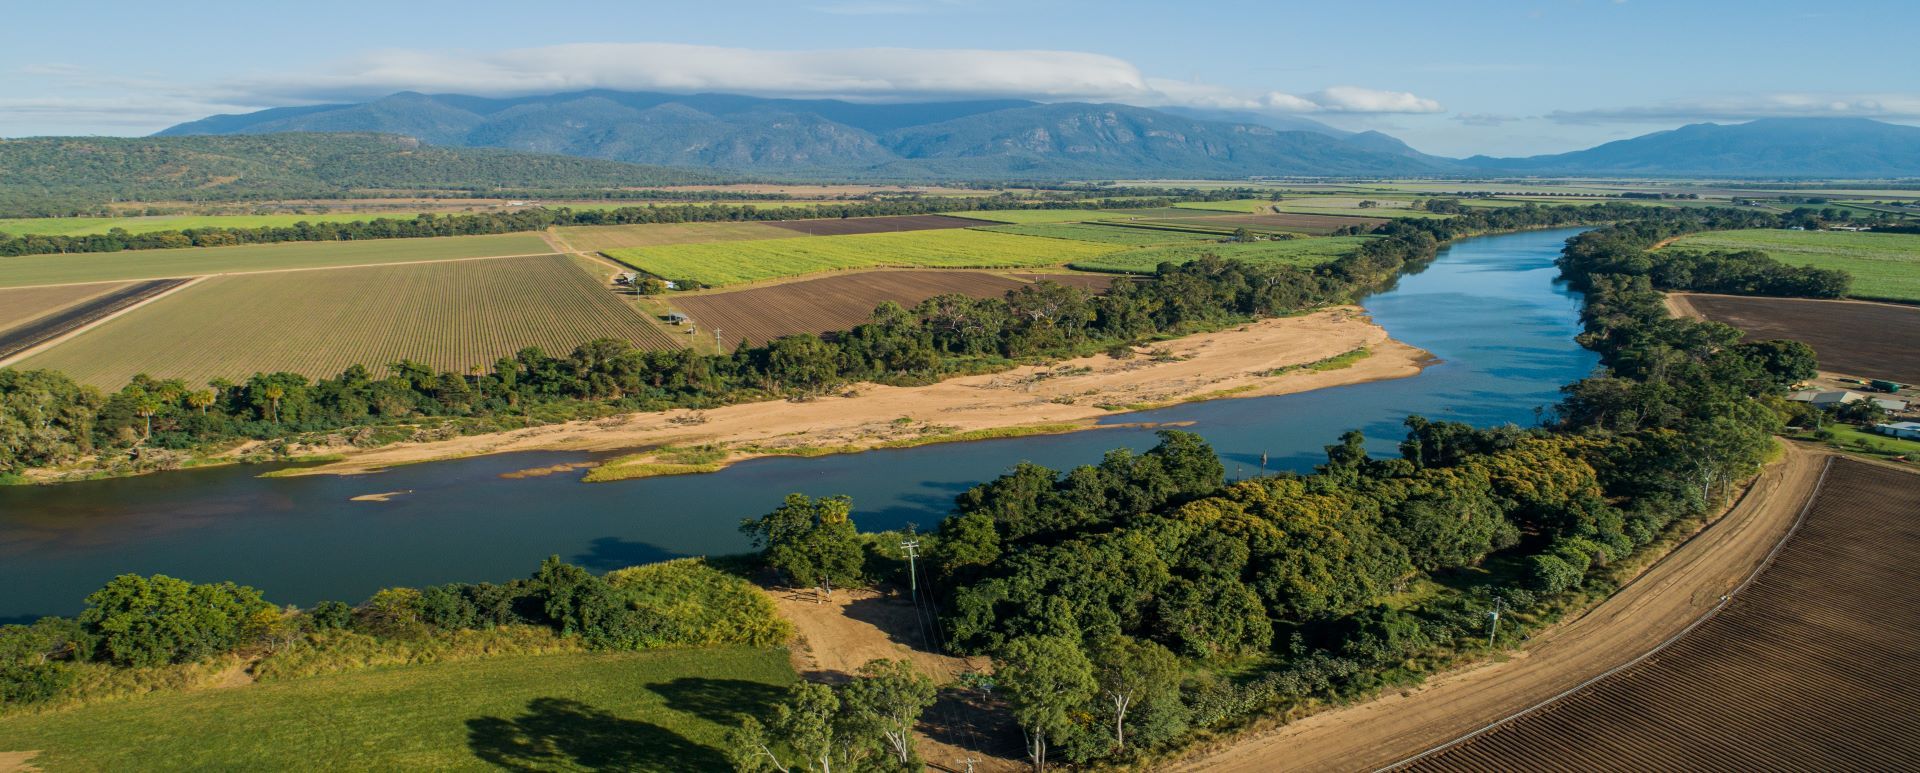 Aerial photograph of river and surrounding farmlands, with mountains in the background.